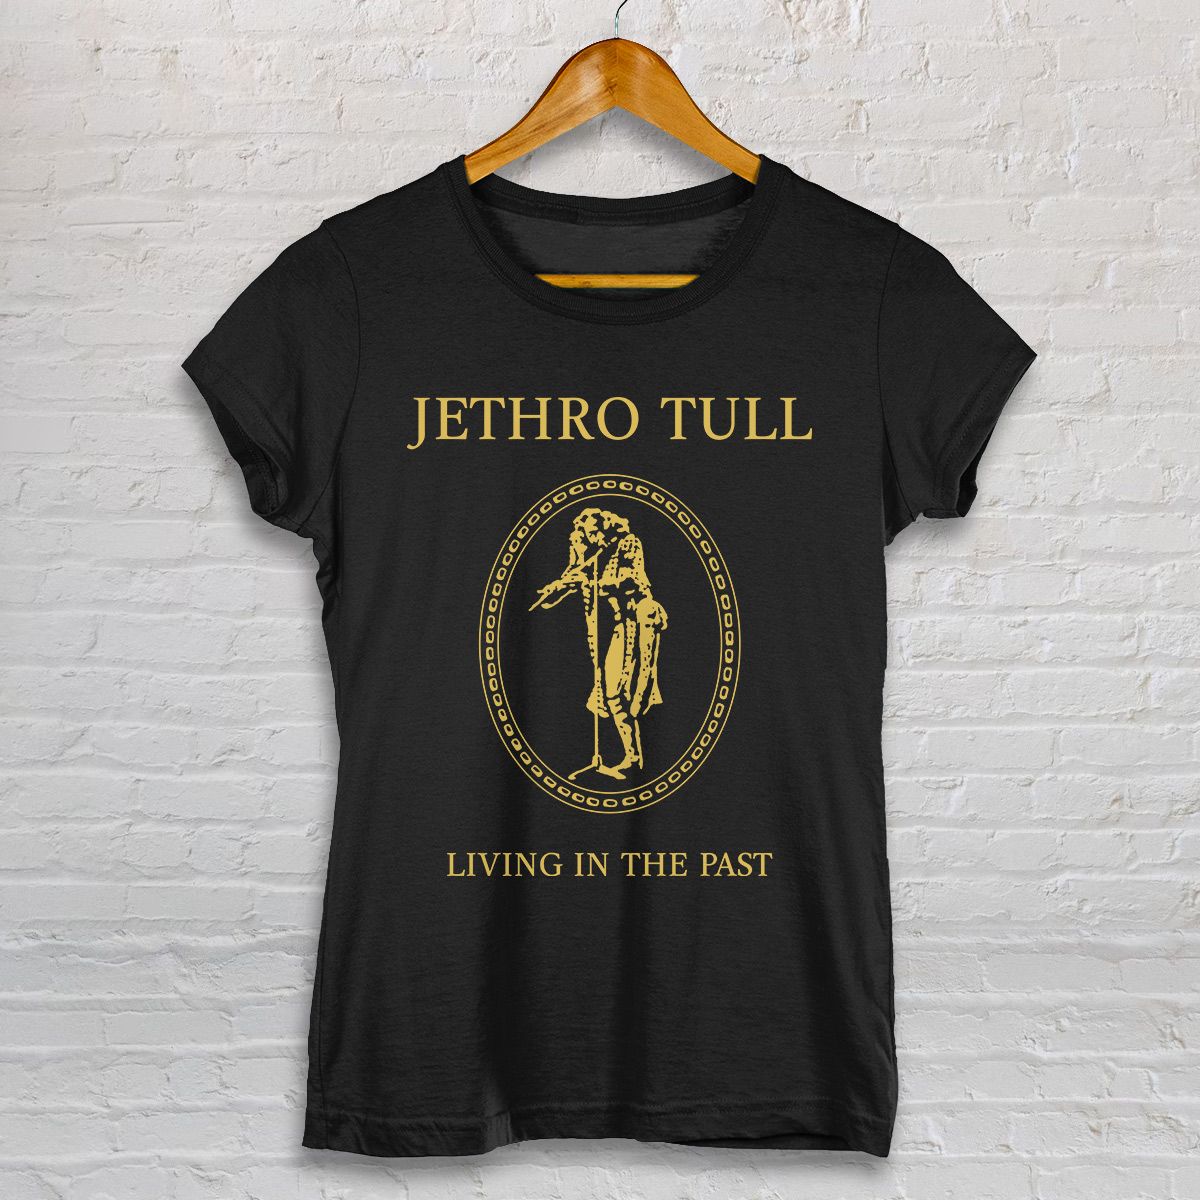 Nome do produto: BABY LOOK - JETHRO TULL - LIVING IN THE PAST